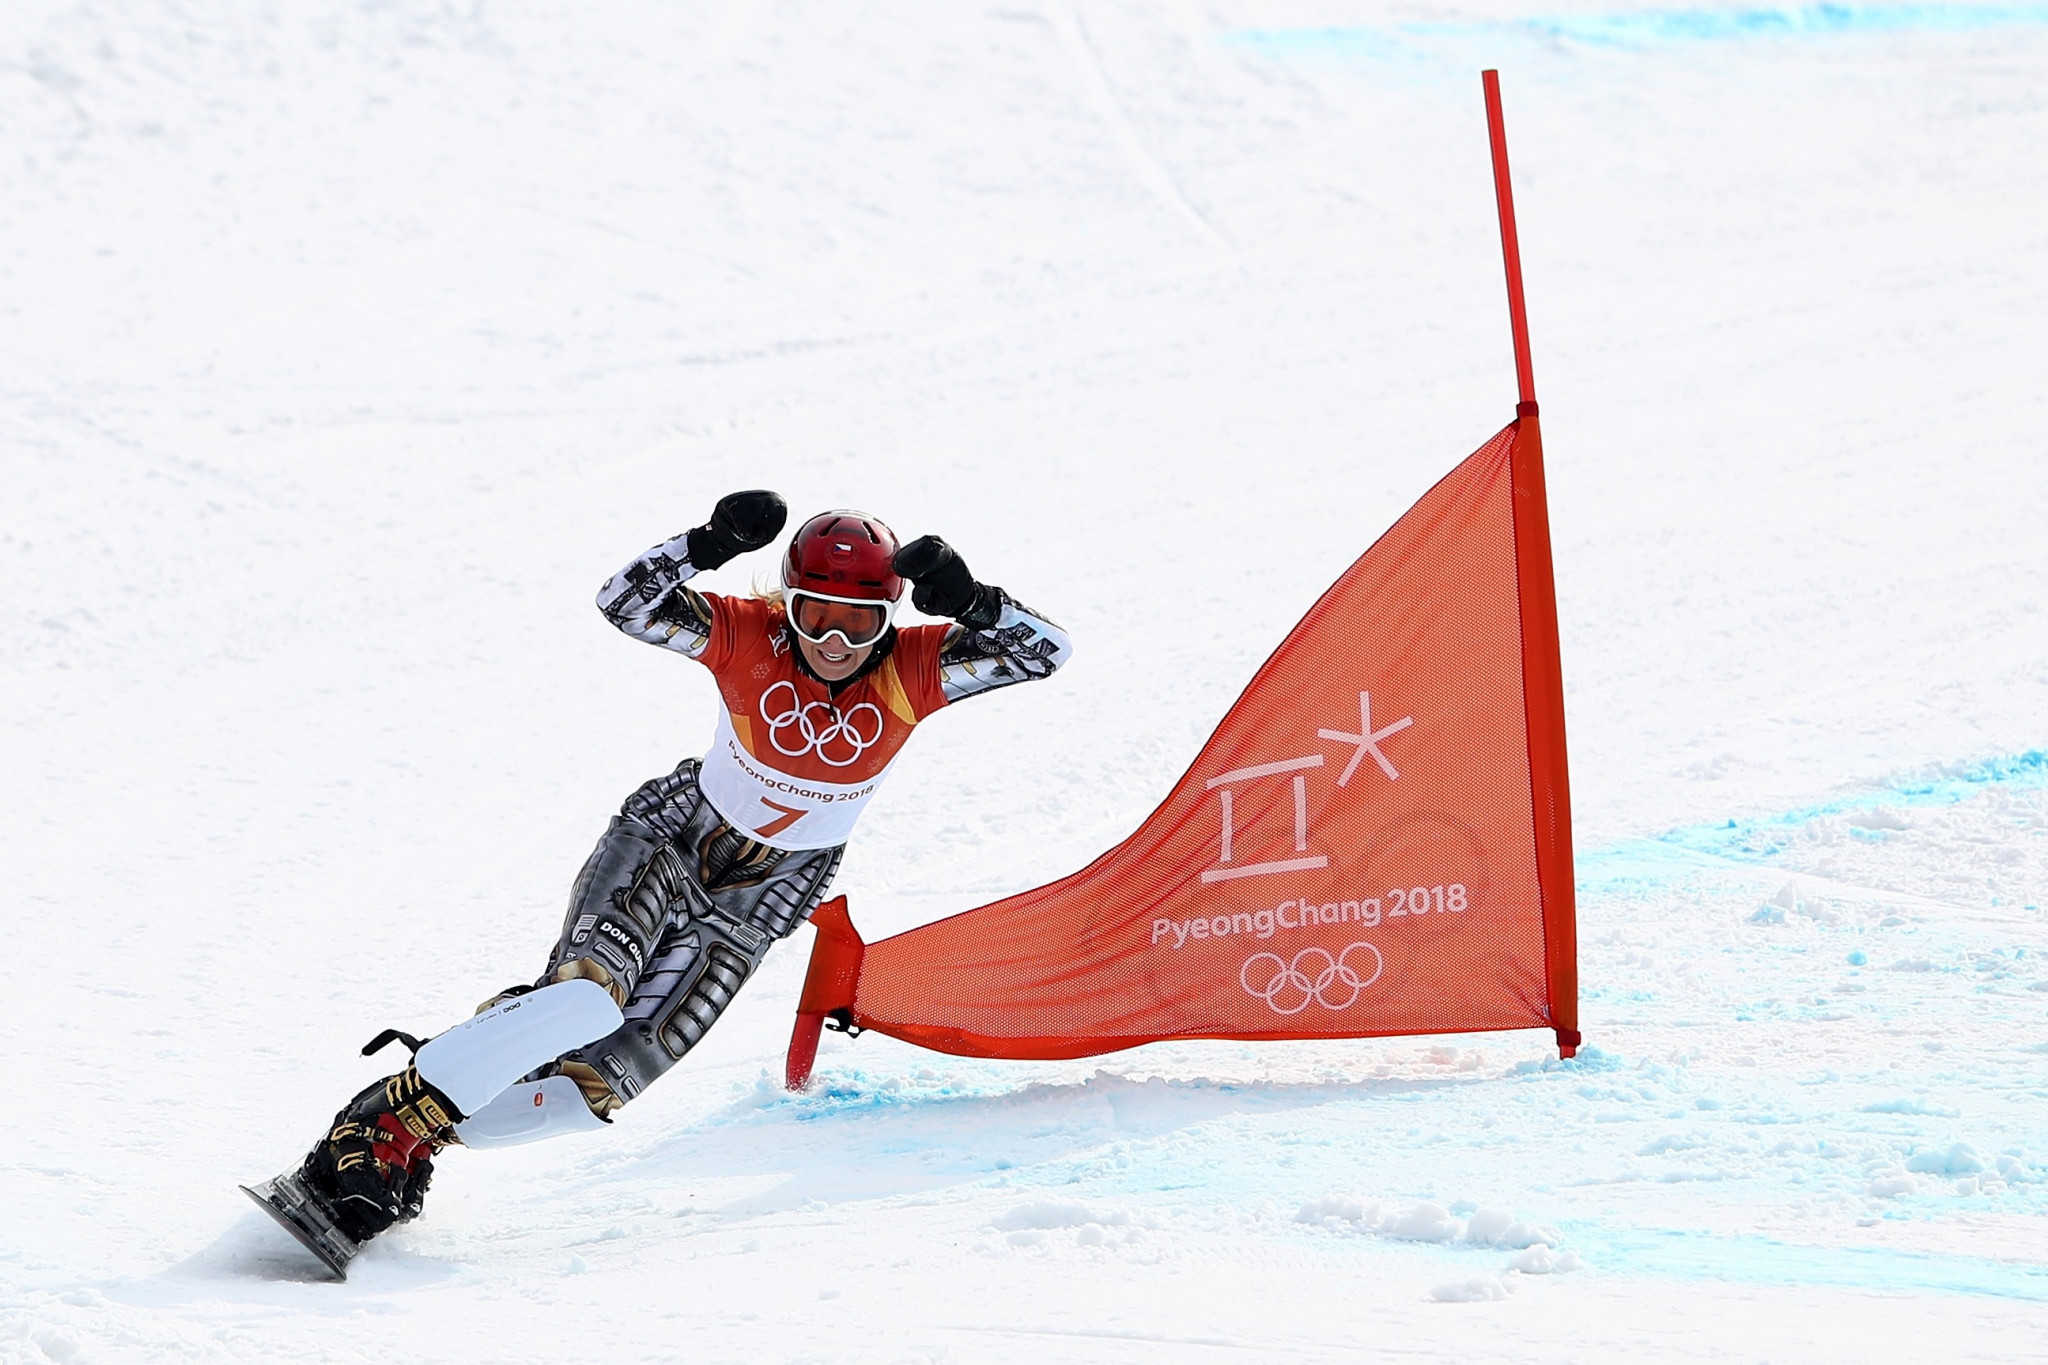 Ester Ledecká completed a sensational golden double at Pyeongchang 2018 as the Czech star stormed to victory in the women's snowboard parallel giant slalom to add to her remarkable Alpine skiing super-G triumph ©Getty Images